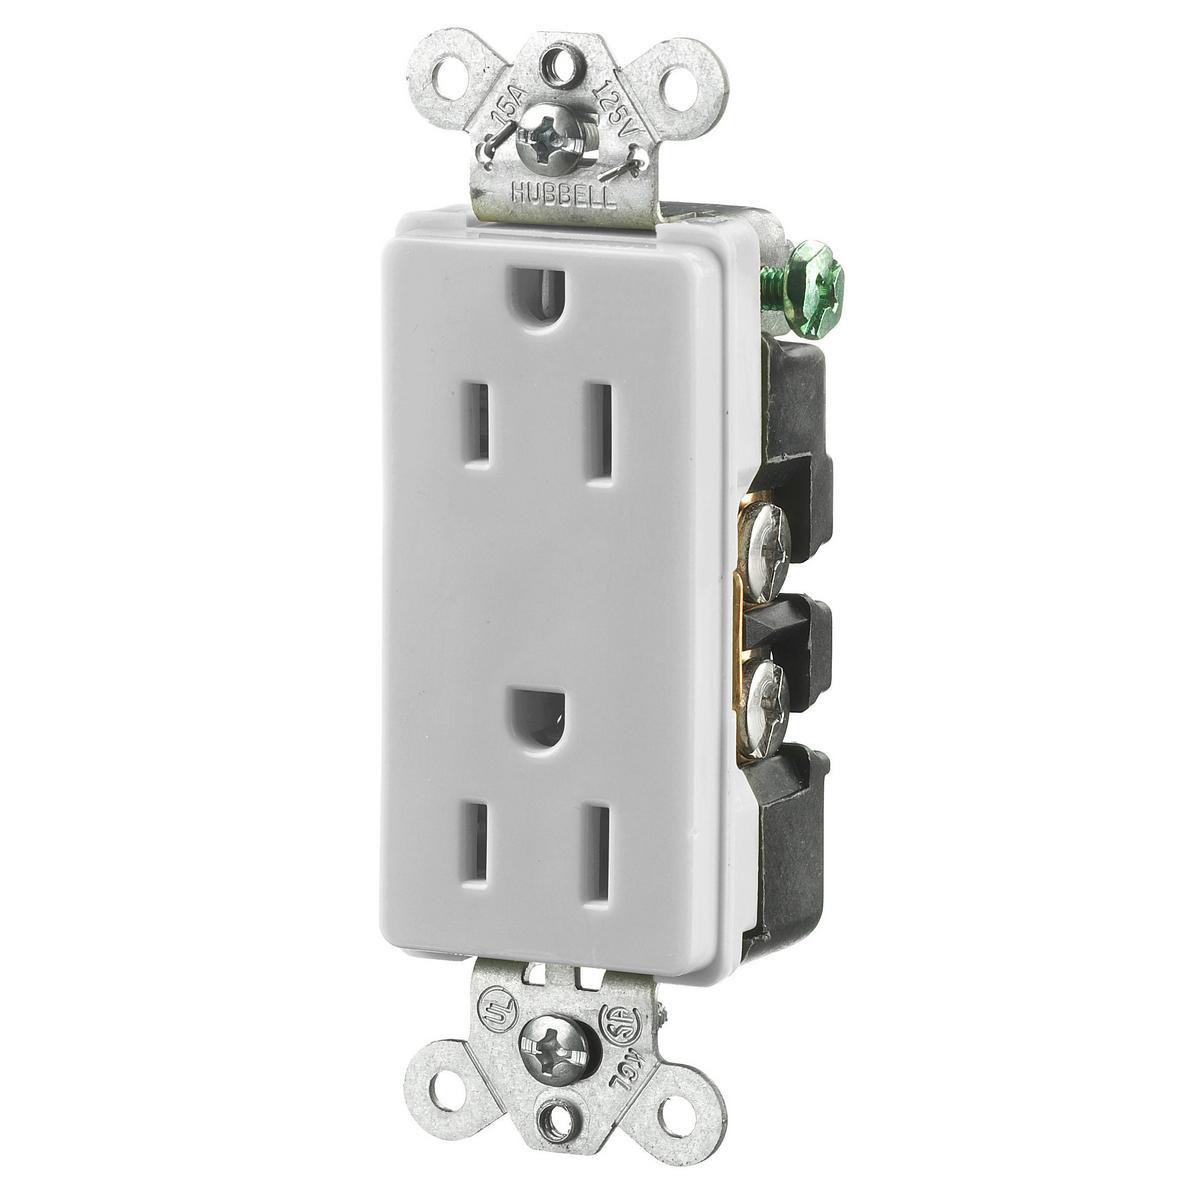 Hubbell HBL2152OW Straight Blade Devices, Receptacles, Duplex, Decorator/Commercial/Industrial Grade, 2-Pole 3-Wire Grounding, 15A 125V, 5-15R, Office White, Single Pack.  ; Aesthetic Style Line® decorator design ; Triple wipe contacts ; Standard, Self Grounding